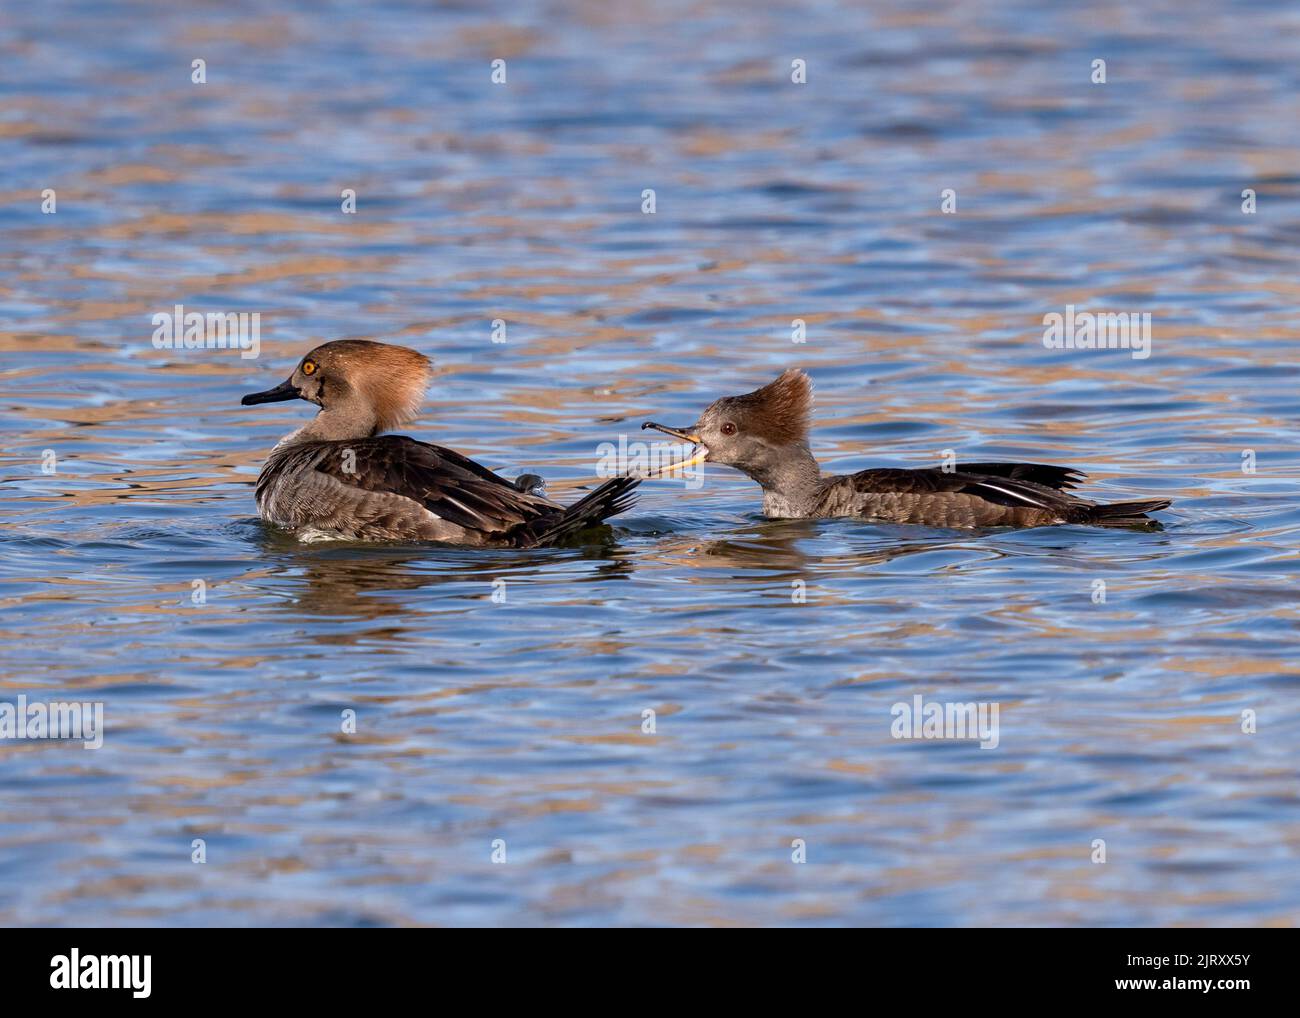 A female Hooded Merganser snaps at a young male, identifiable with its dark beak, yellow eye and dark feather outlines on its face. Stock Photo